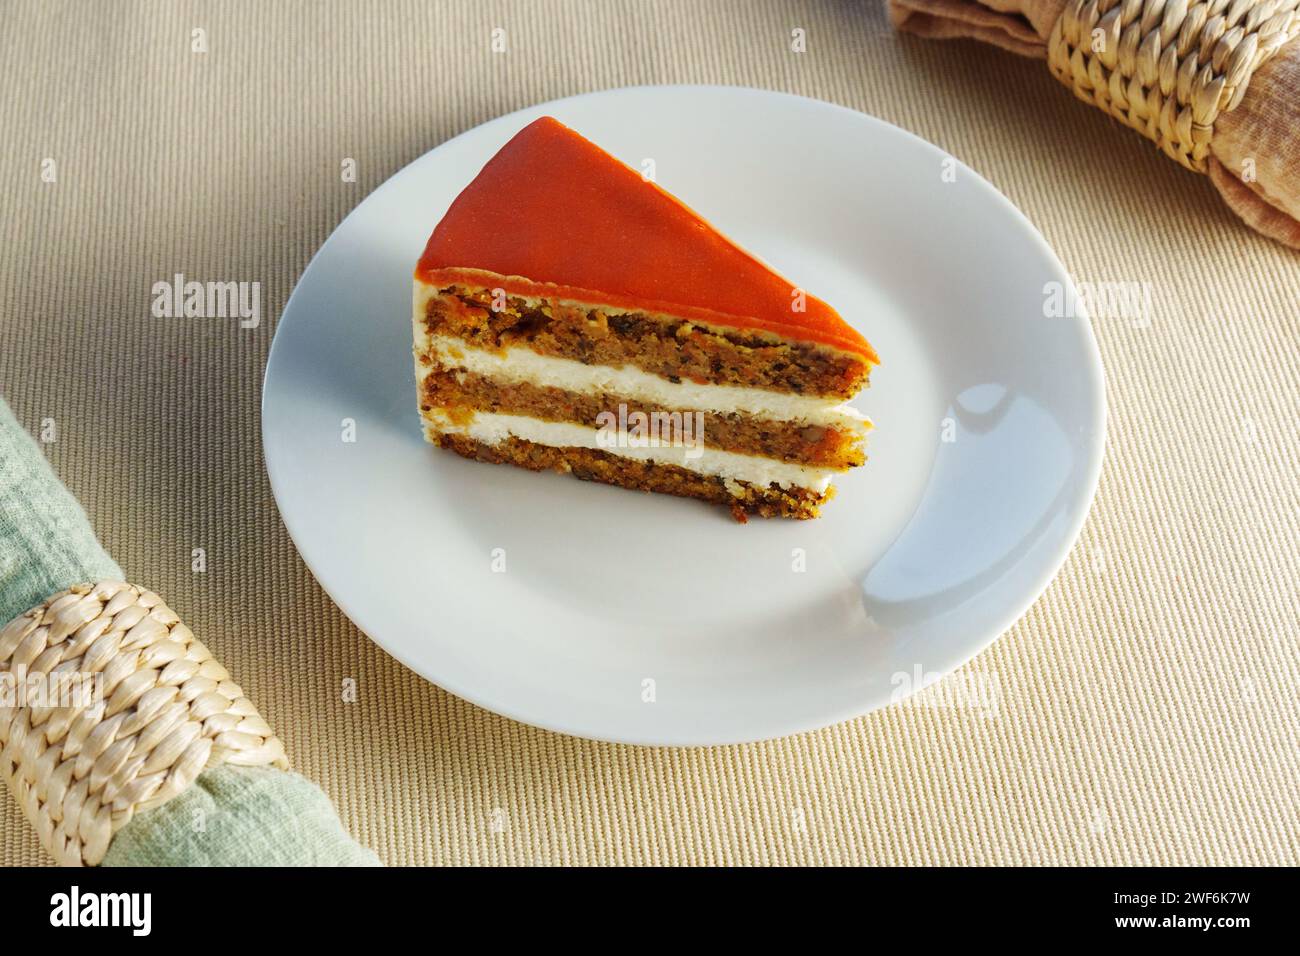 Deliciously Moist Carrot Cake Served on a Clean, White Plate Stock Photo